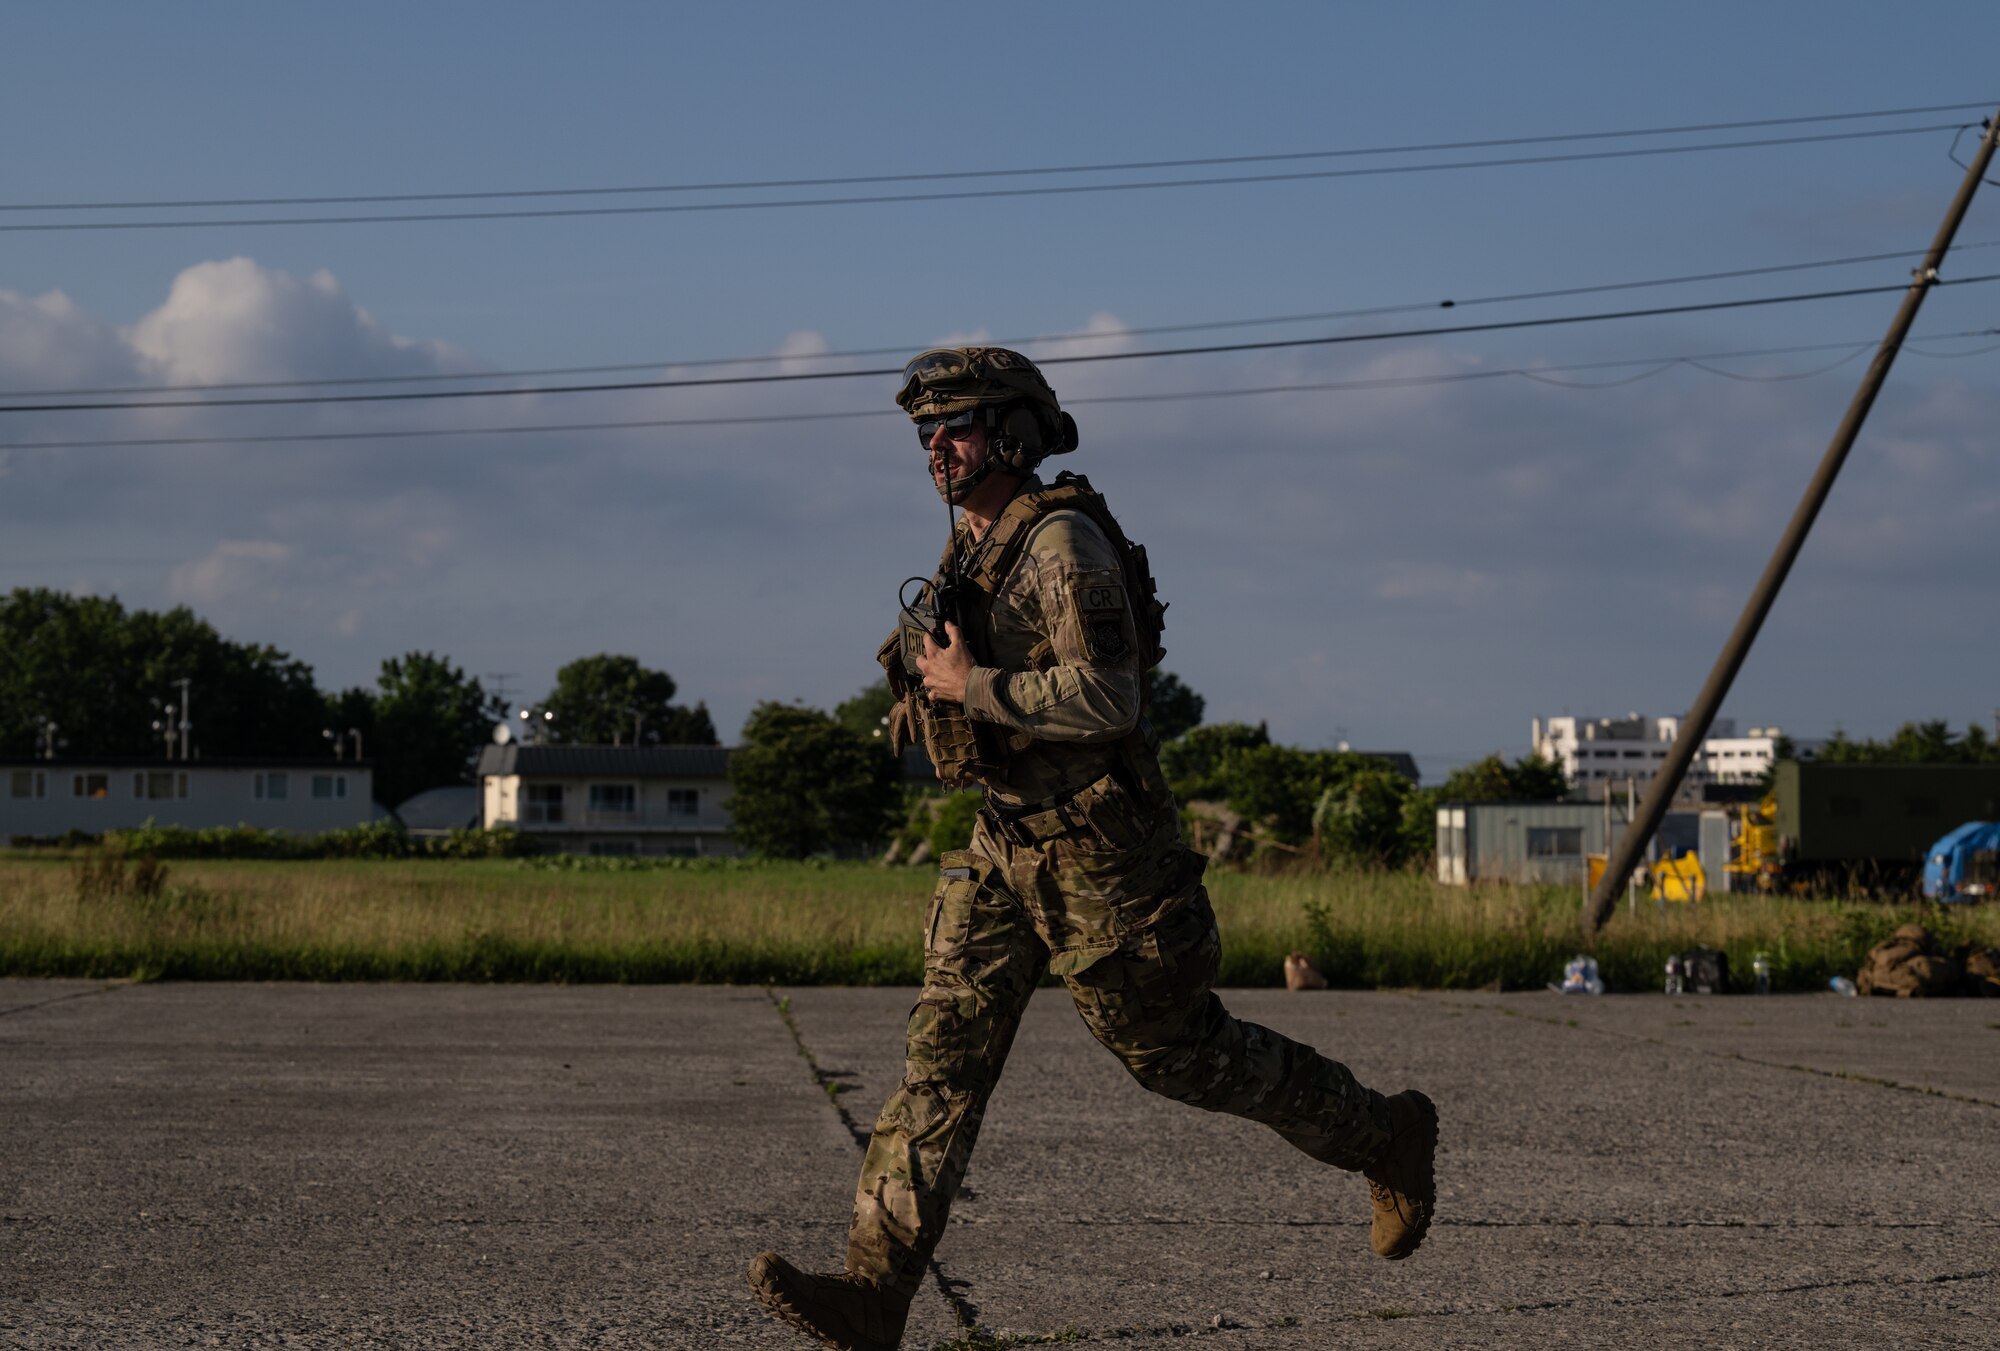 An operator assigned to the 821st Contingency Response Squadron sprints on the flight line at Yakumo Sub Base Japan, July 10, 2023 in support of Mobility Guardian 2023. A multilateral endeavor, MG23 features seven participating countries – Australia, Canada, France, Japan, New Zealand, United Kingdom, and the United States – operating approximately 70 mobility aircraft across multiple locations spanning a 3,000 mile exercise area from July 5th through July 21. Our Allies and partners are one of our greatest strengths and a key strategic advantage. MG23 is an opportunity to deepen our connections with regional Allies and partners using bold initiatives. (U.S. Air Force photo by Tech. Sgt. Alexander Cook)